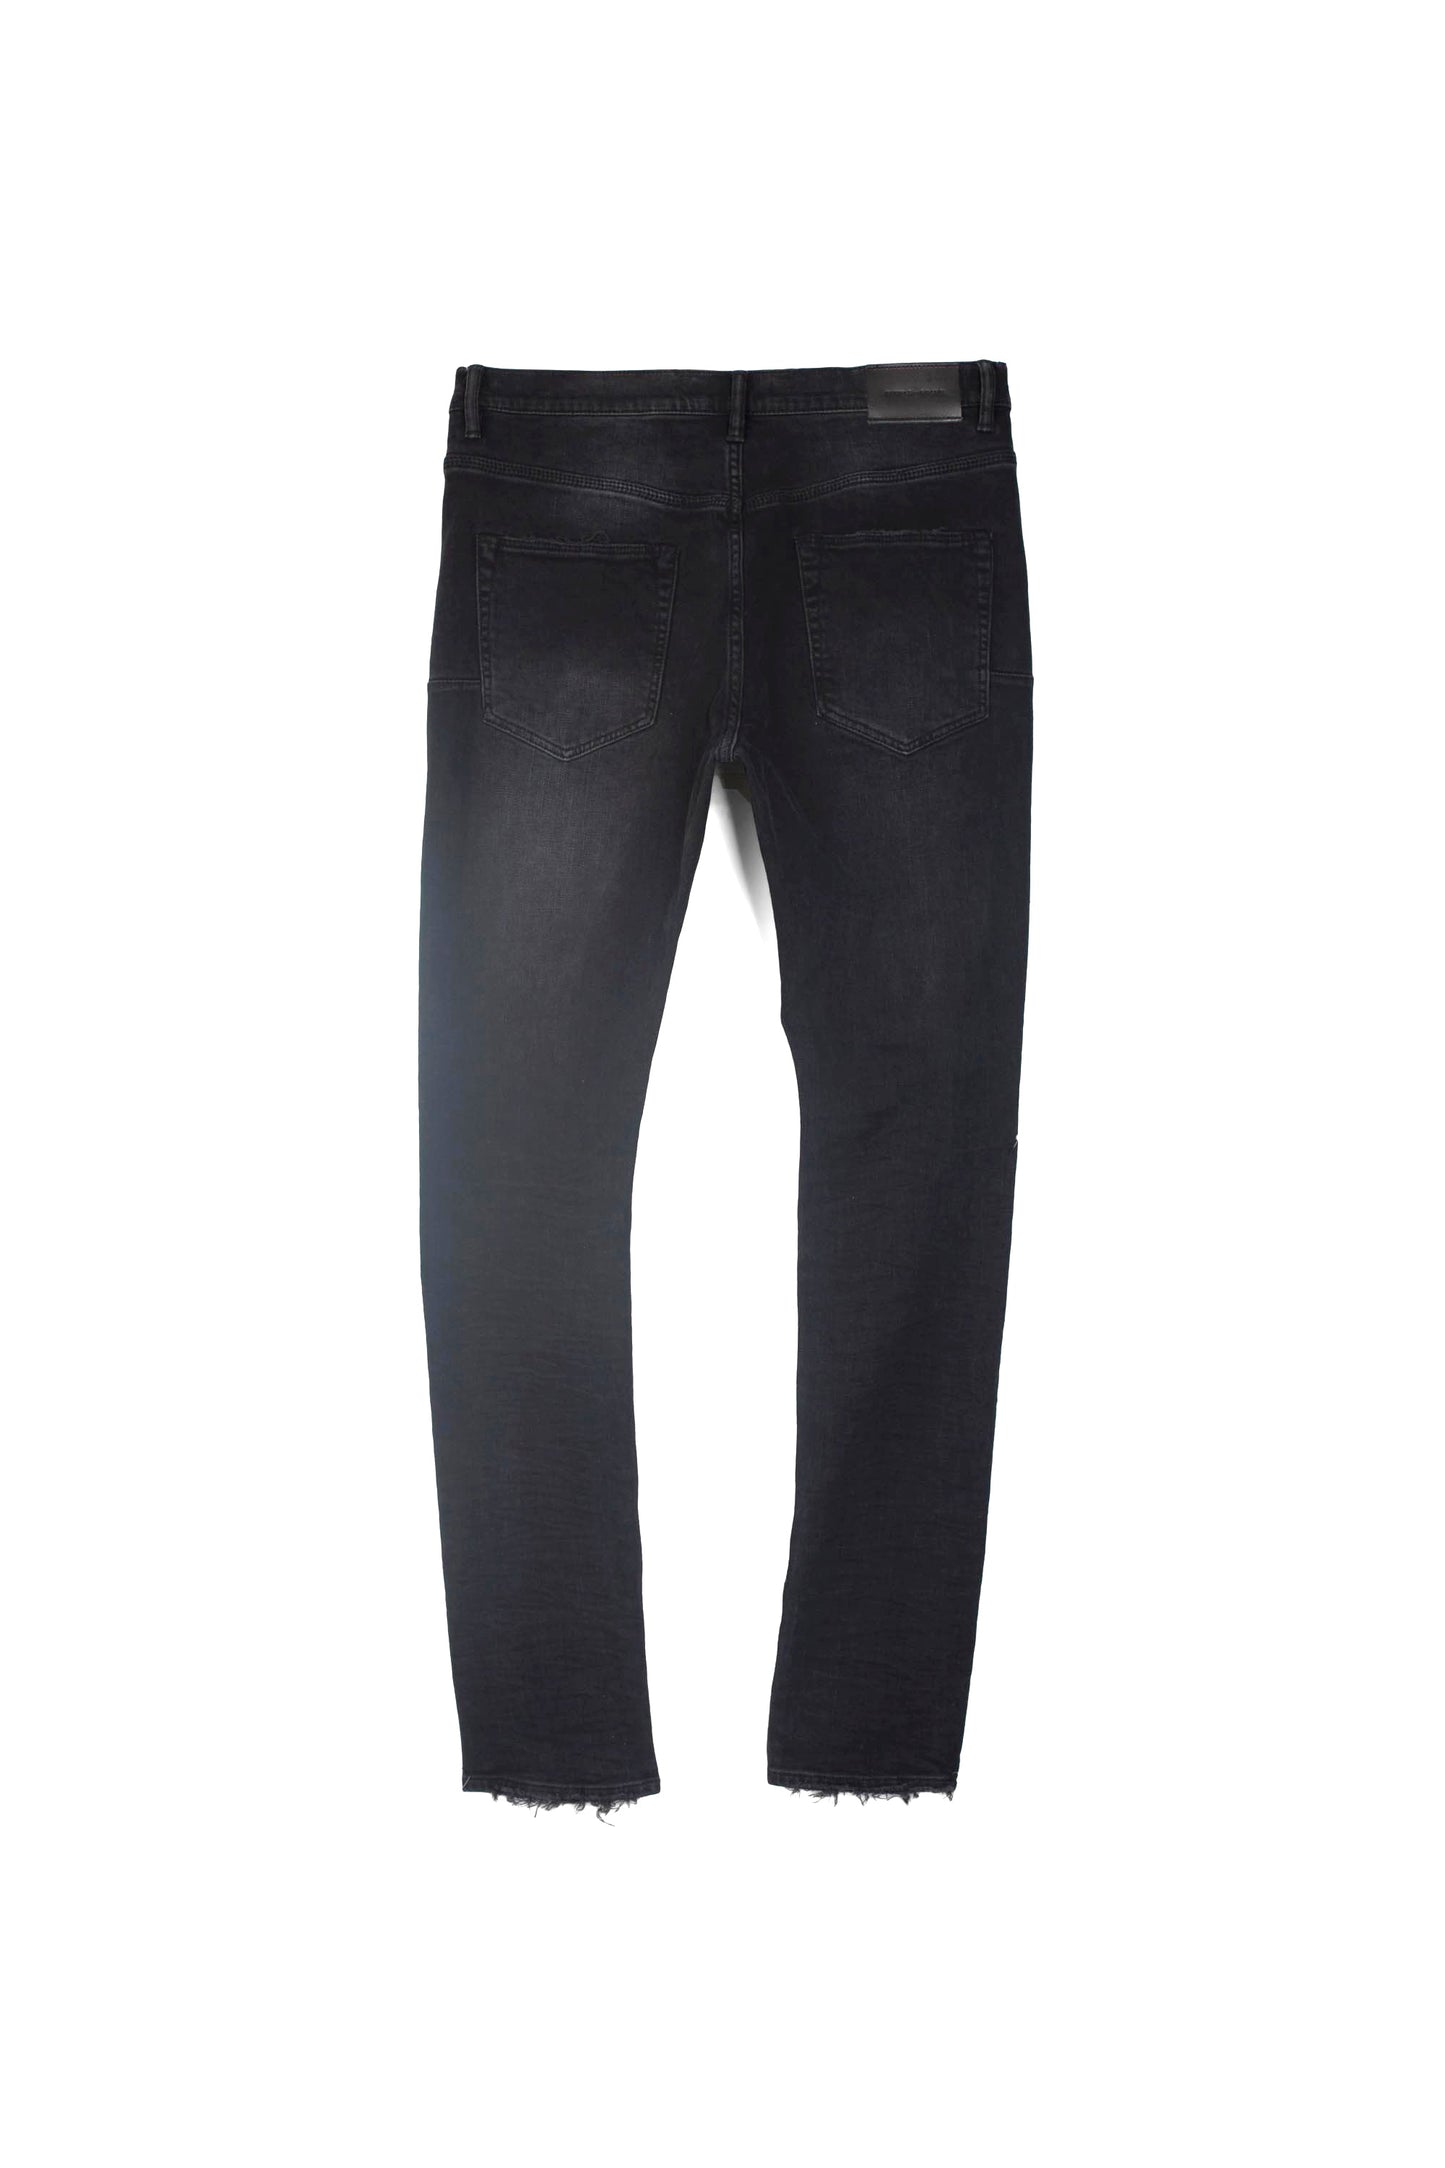 Purple Brand Stretch Destroyed Slim-Fit Jeans, 42% OFF